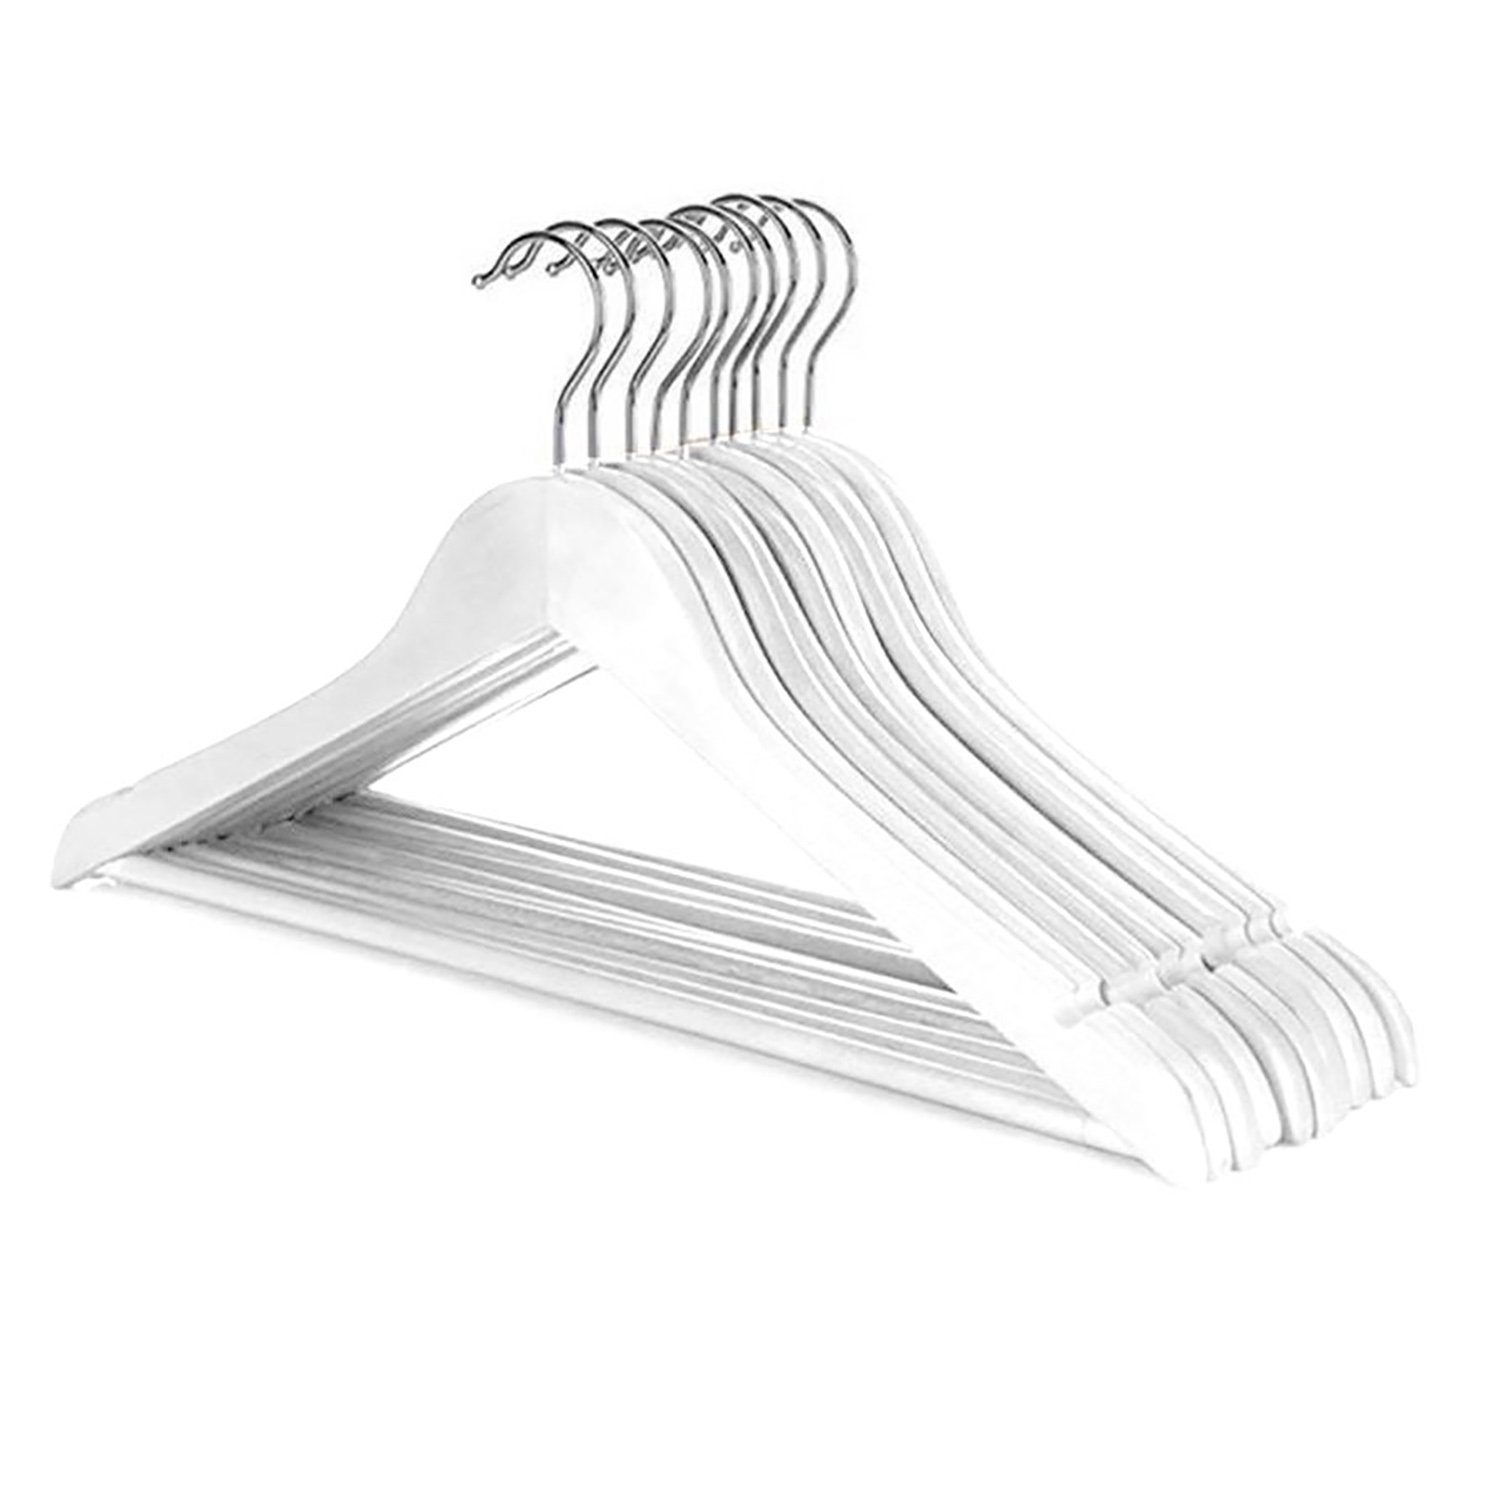 Garment Clothing Display Matt White Wooden TopBottom Clothes Hangers with  Solid Bar and Clips for CoatSuitJacketPantsTrousersDress  China Wood  Hangers and Clothes Hangers price  MadeinChinacom